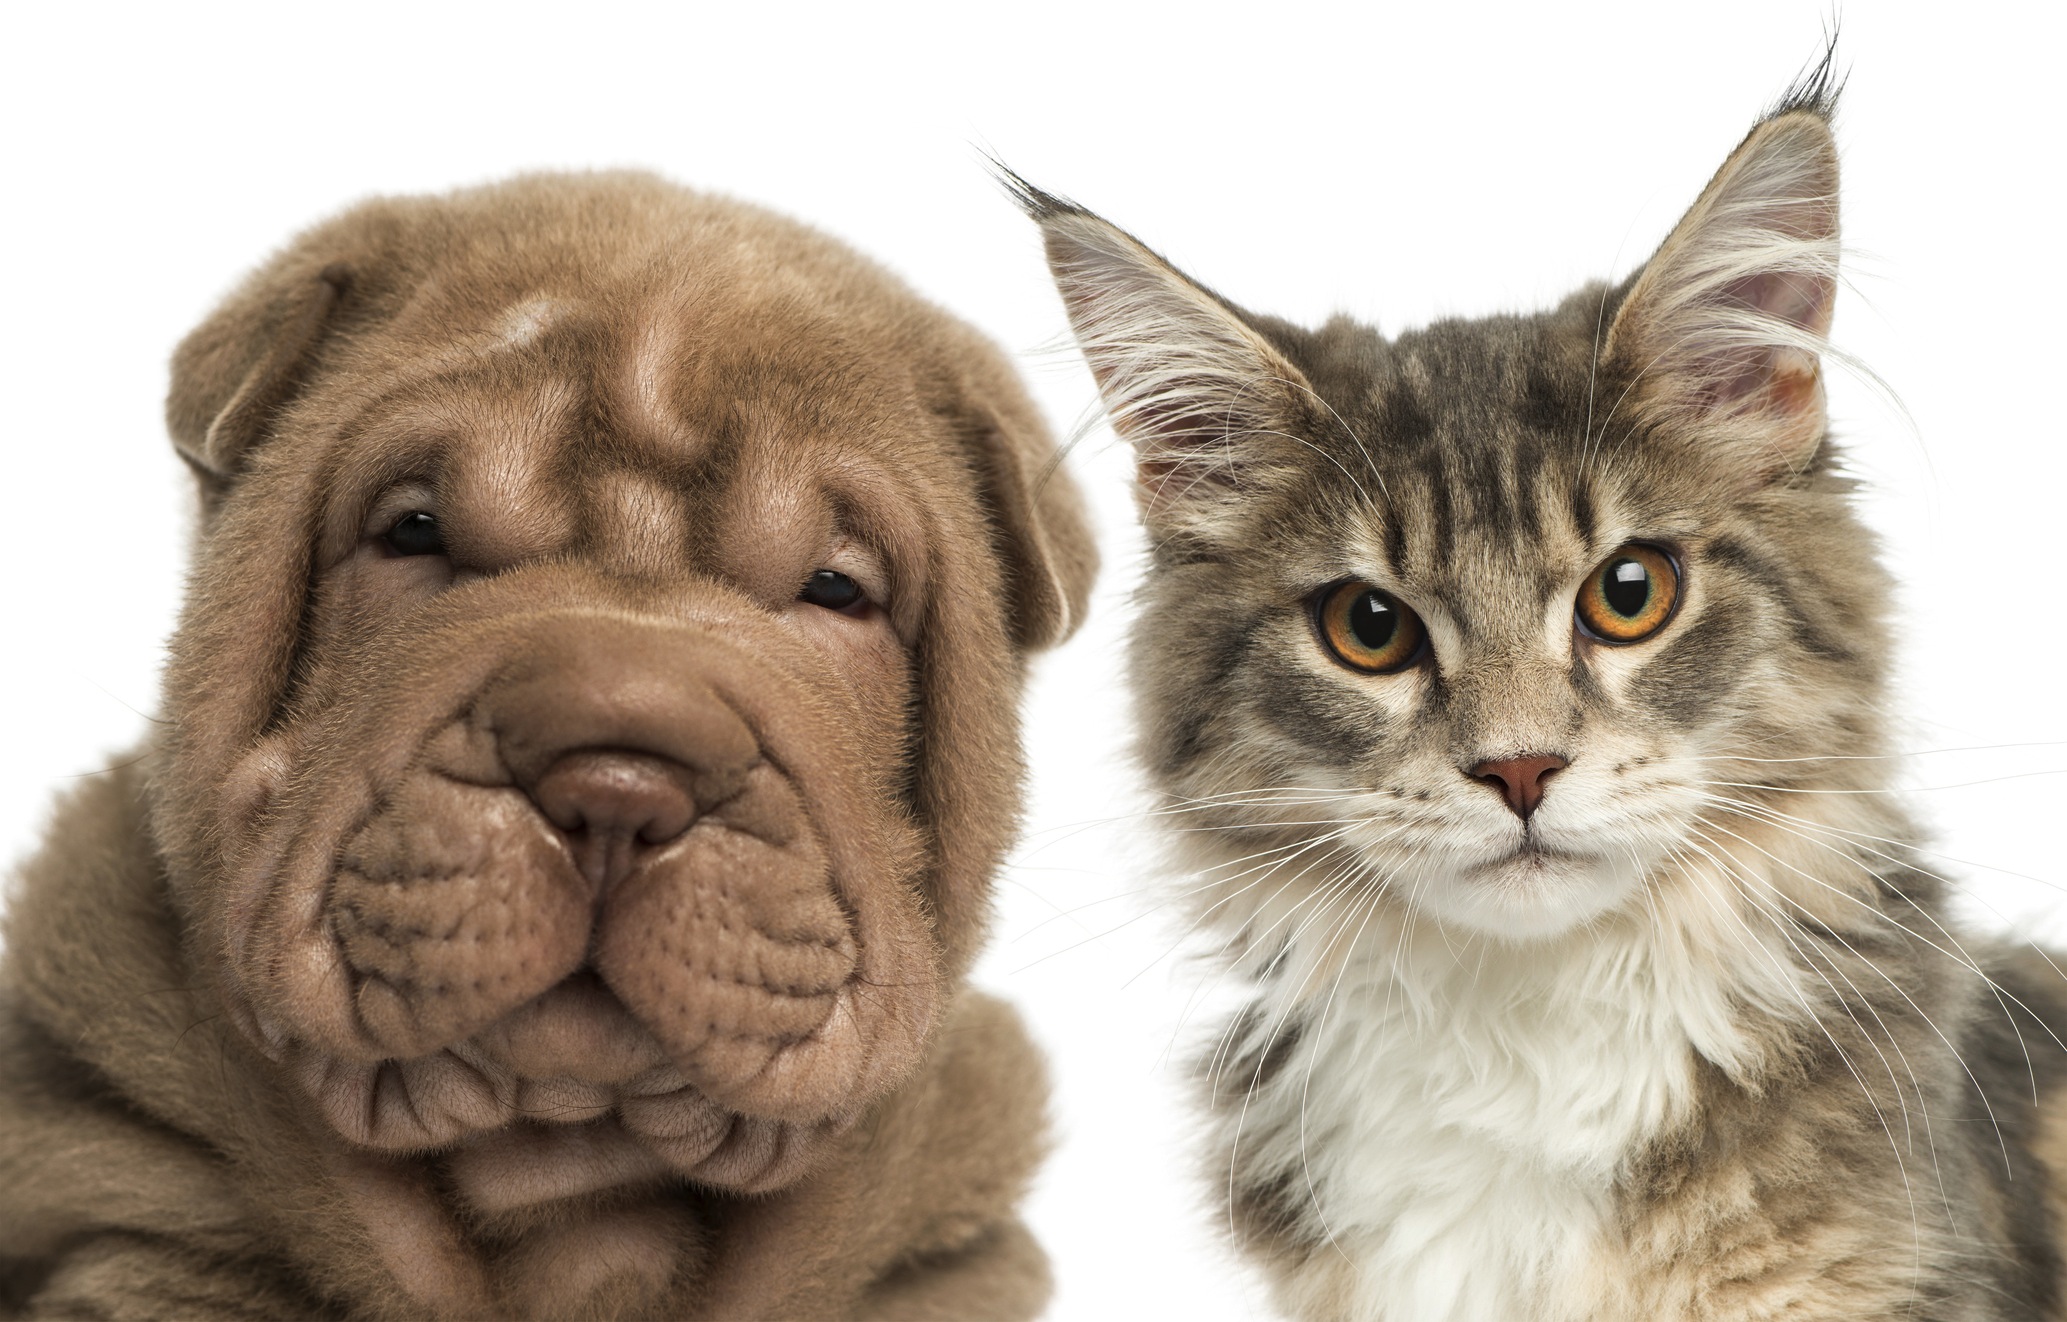 How The Rising Status Of Cats And Dogs Could Doom Biomedical Research